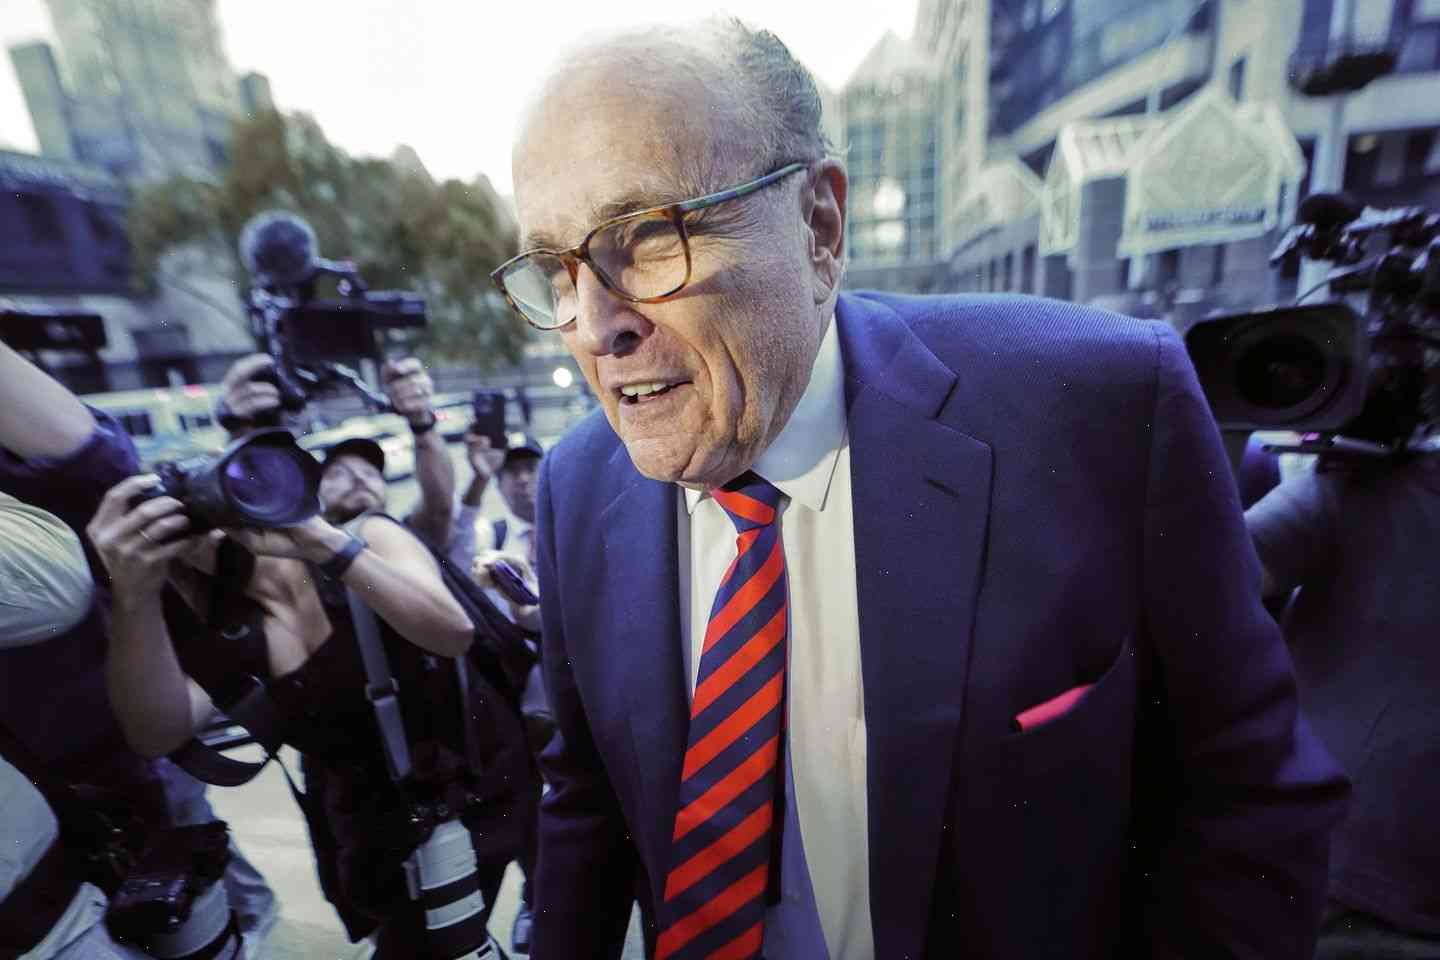 Rudy Giuliani's bid to avoid prosecution on Cohen case rejected